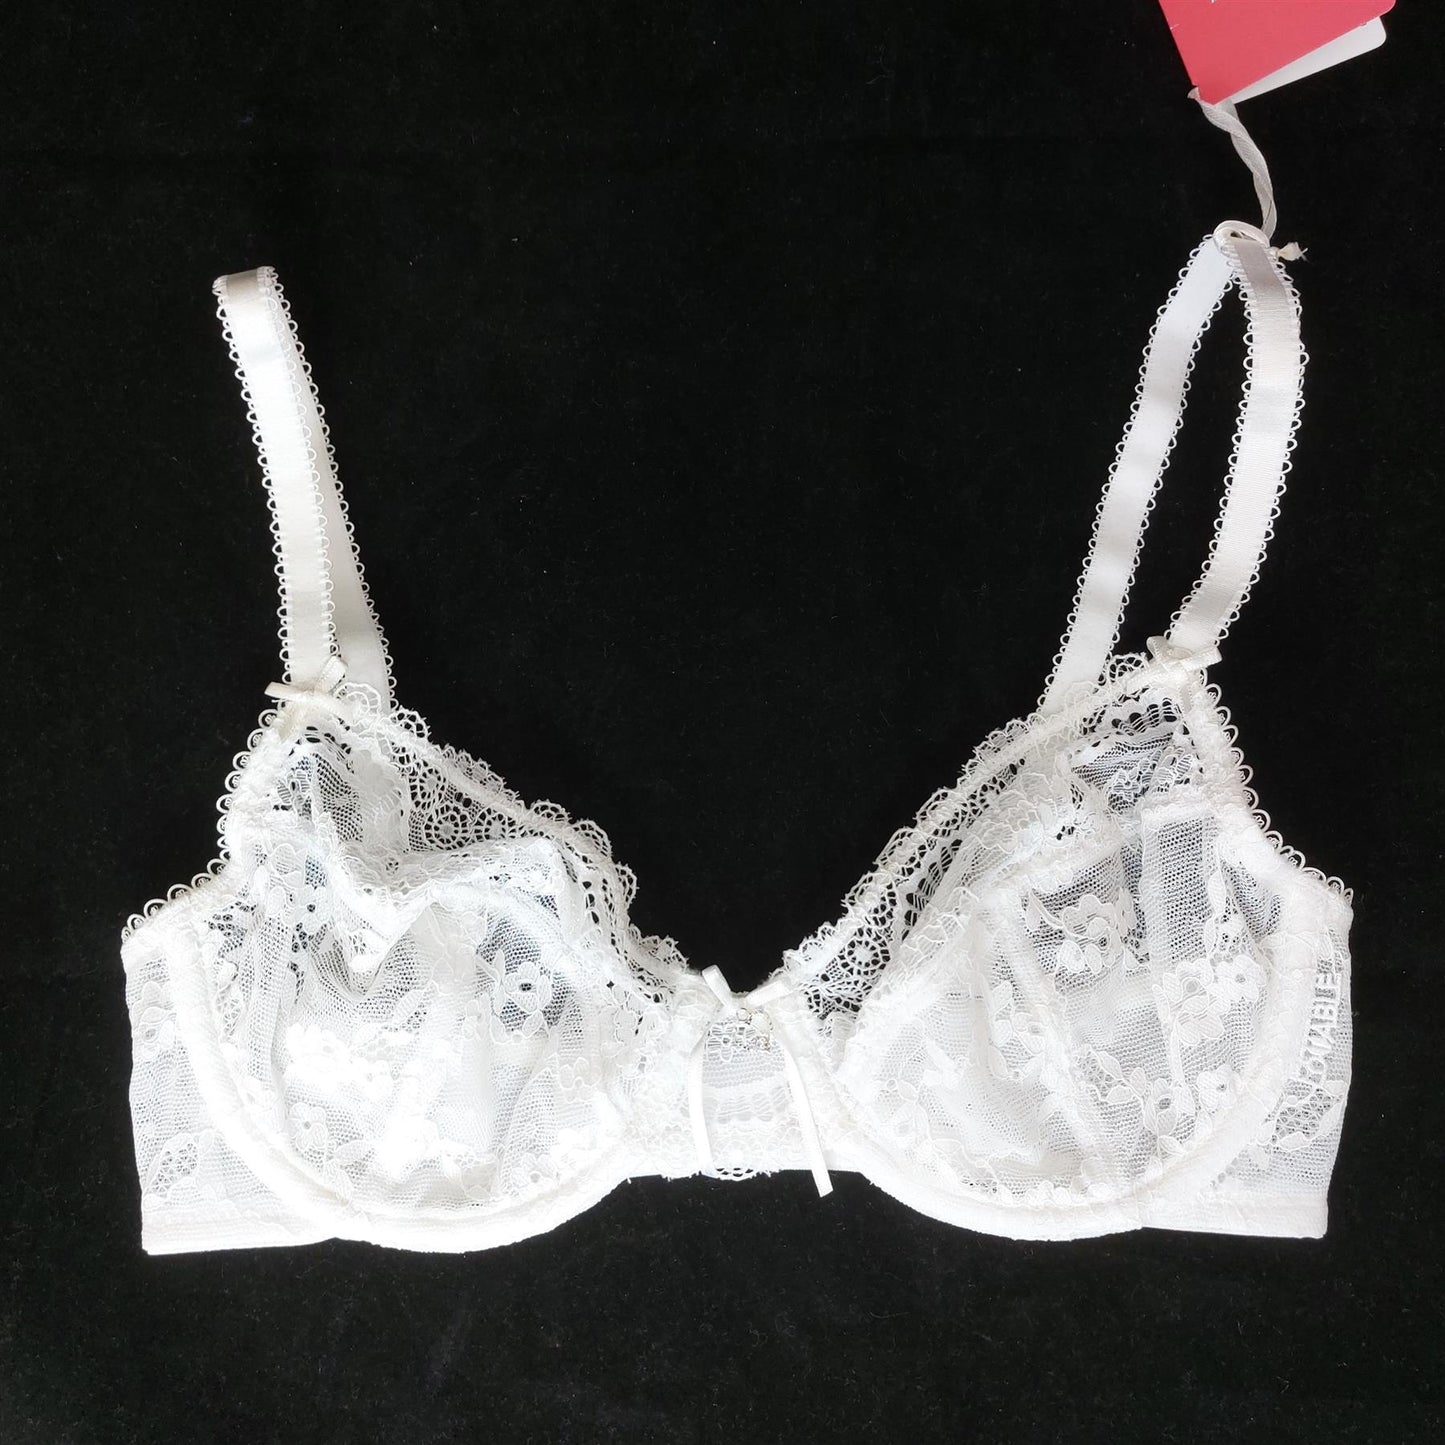 Playtex Underwired Lace Bra Non-Padded Floral Heart Pendant Lovable Lingerie